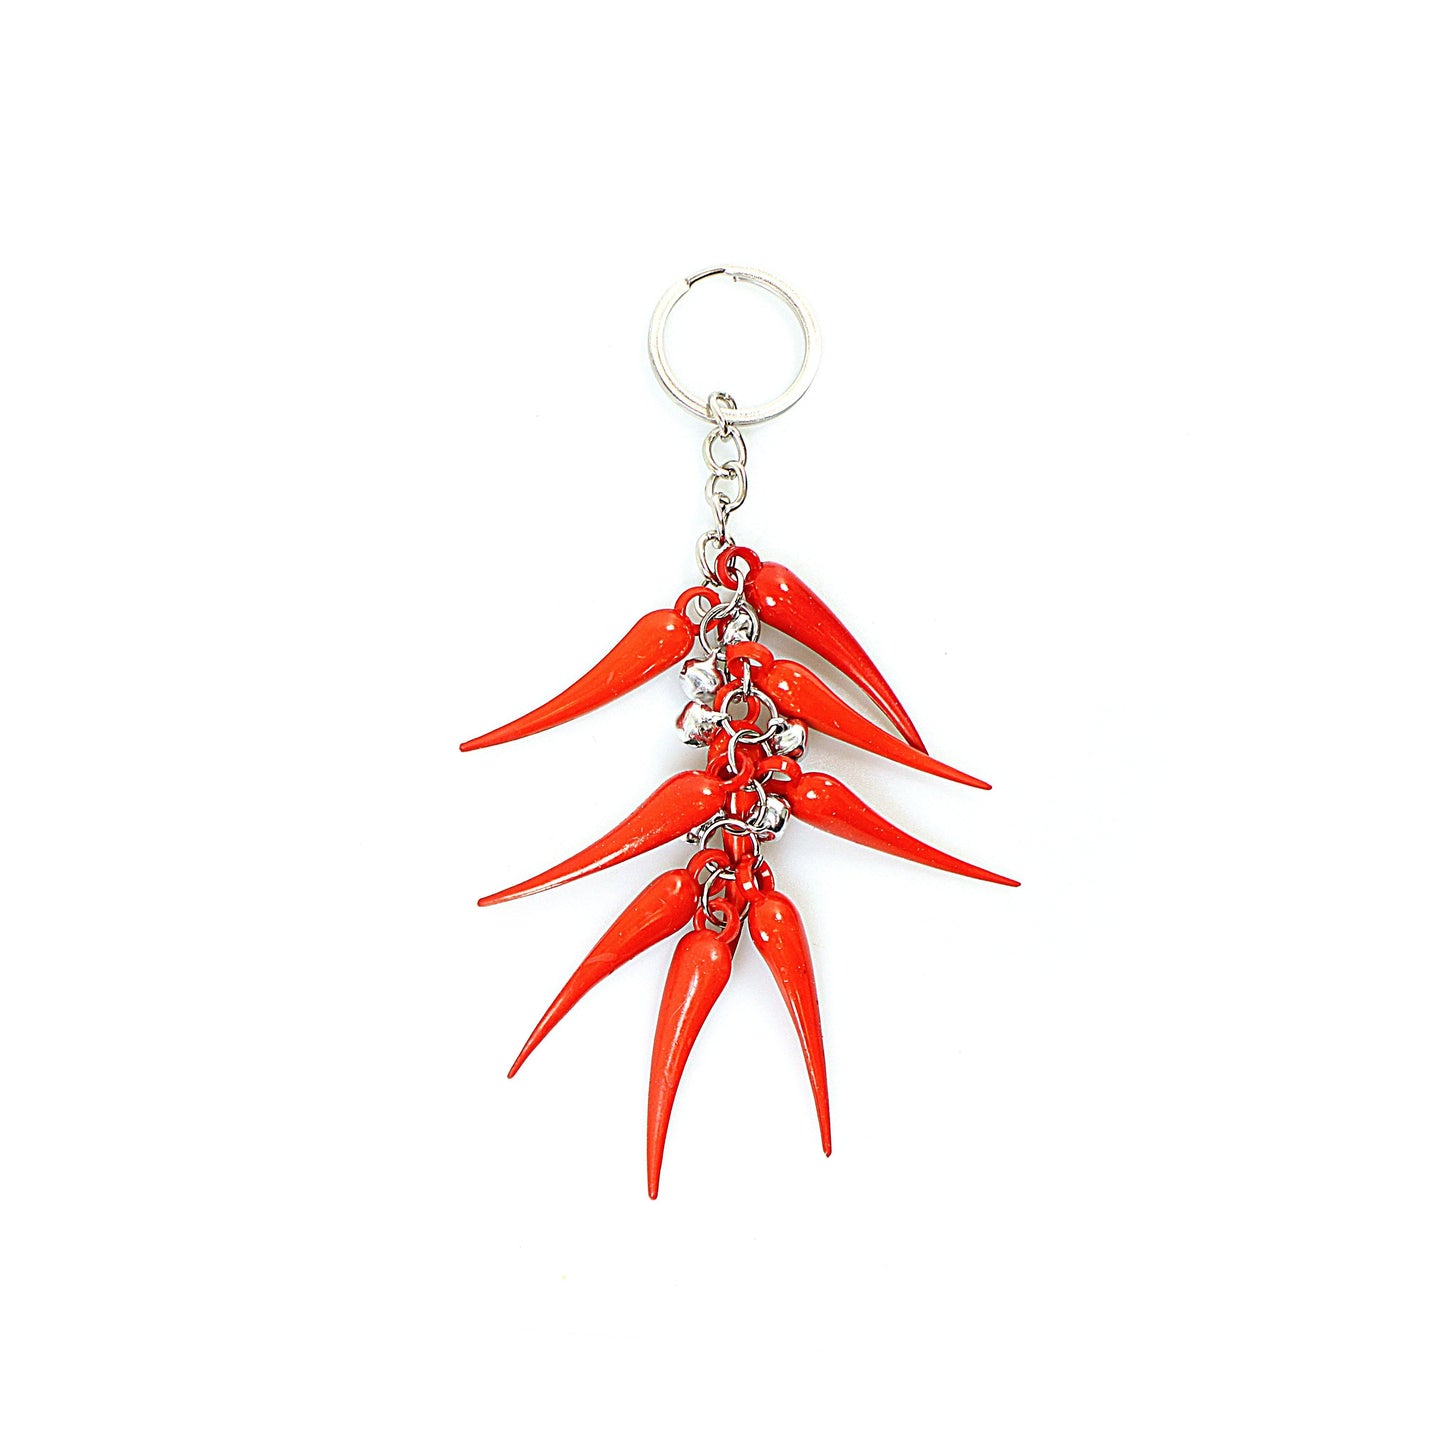 Red / Green Chili Keychain Keyring 1745 (Large Letter Rate)